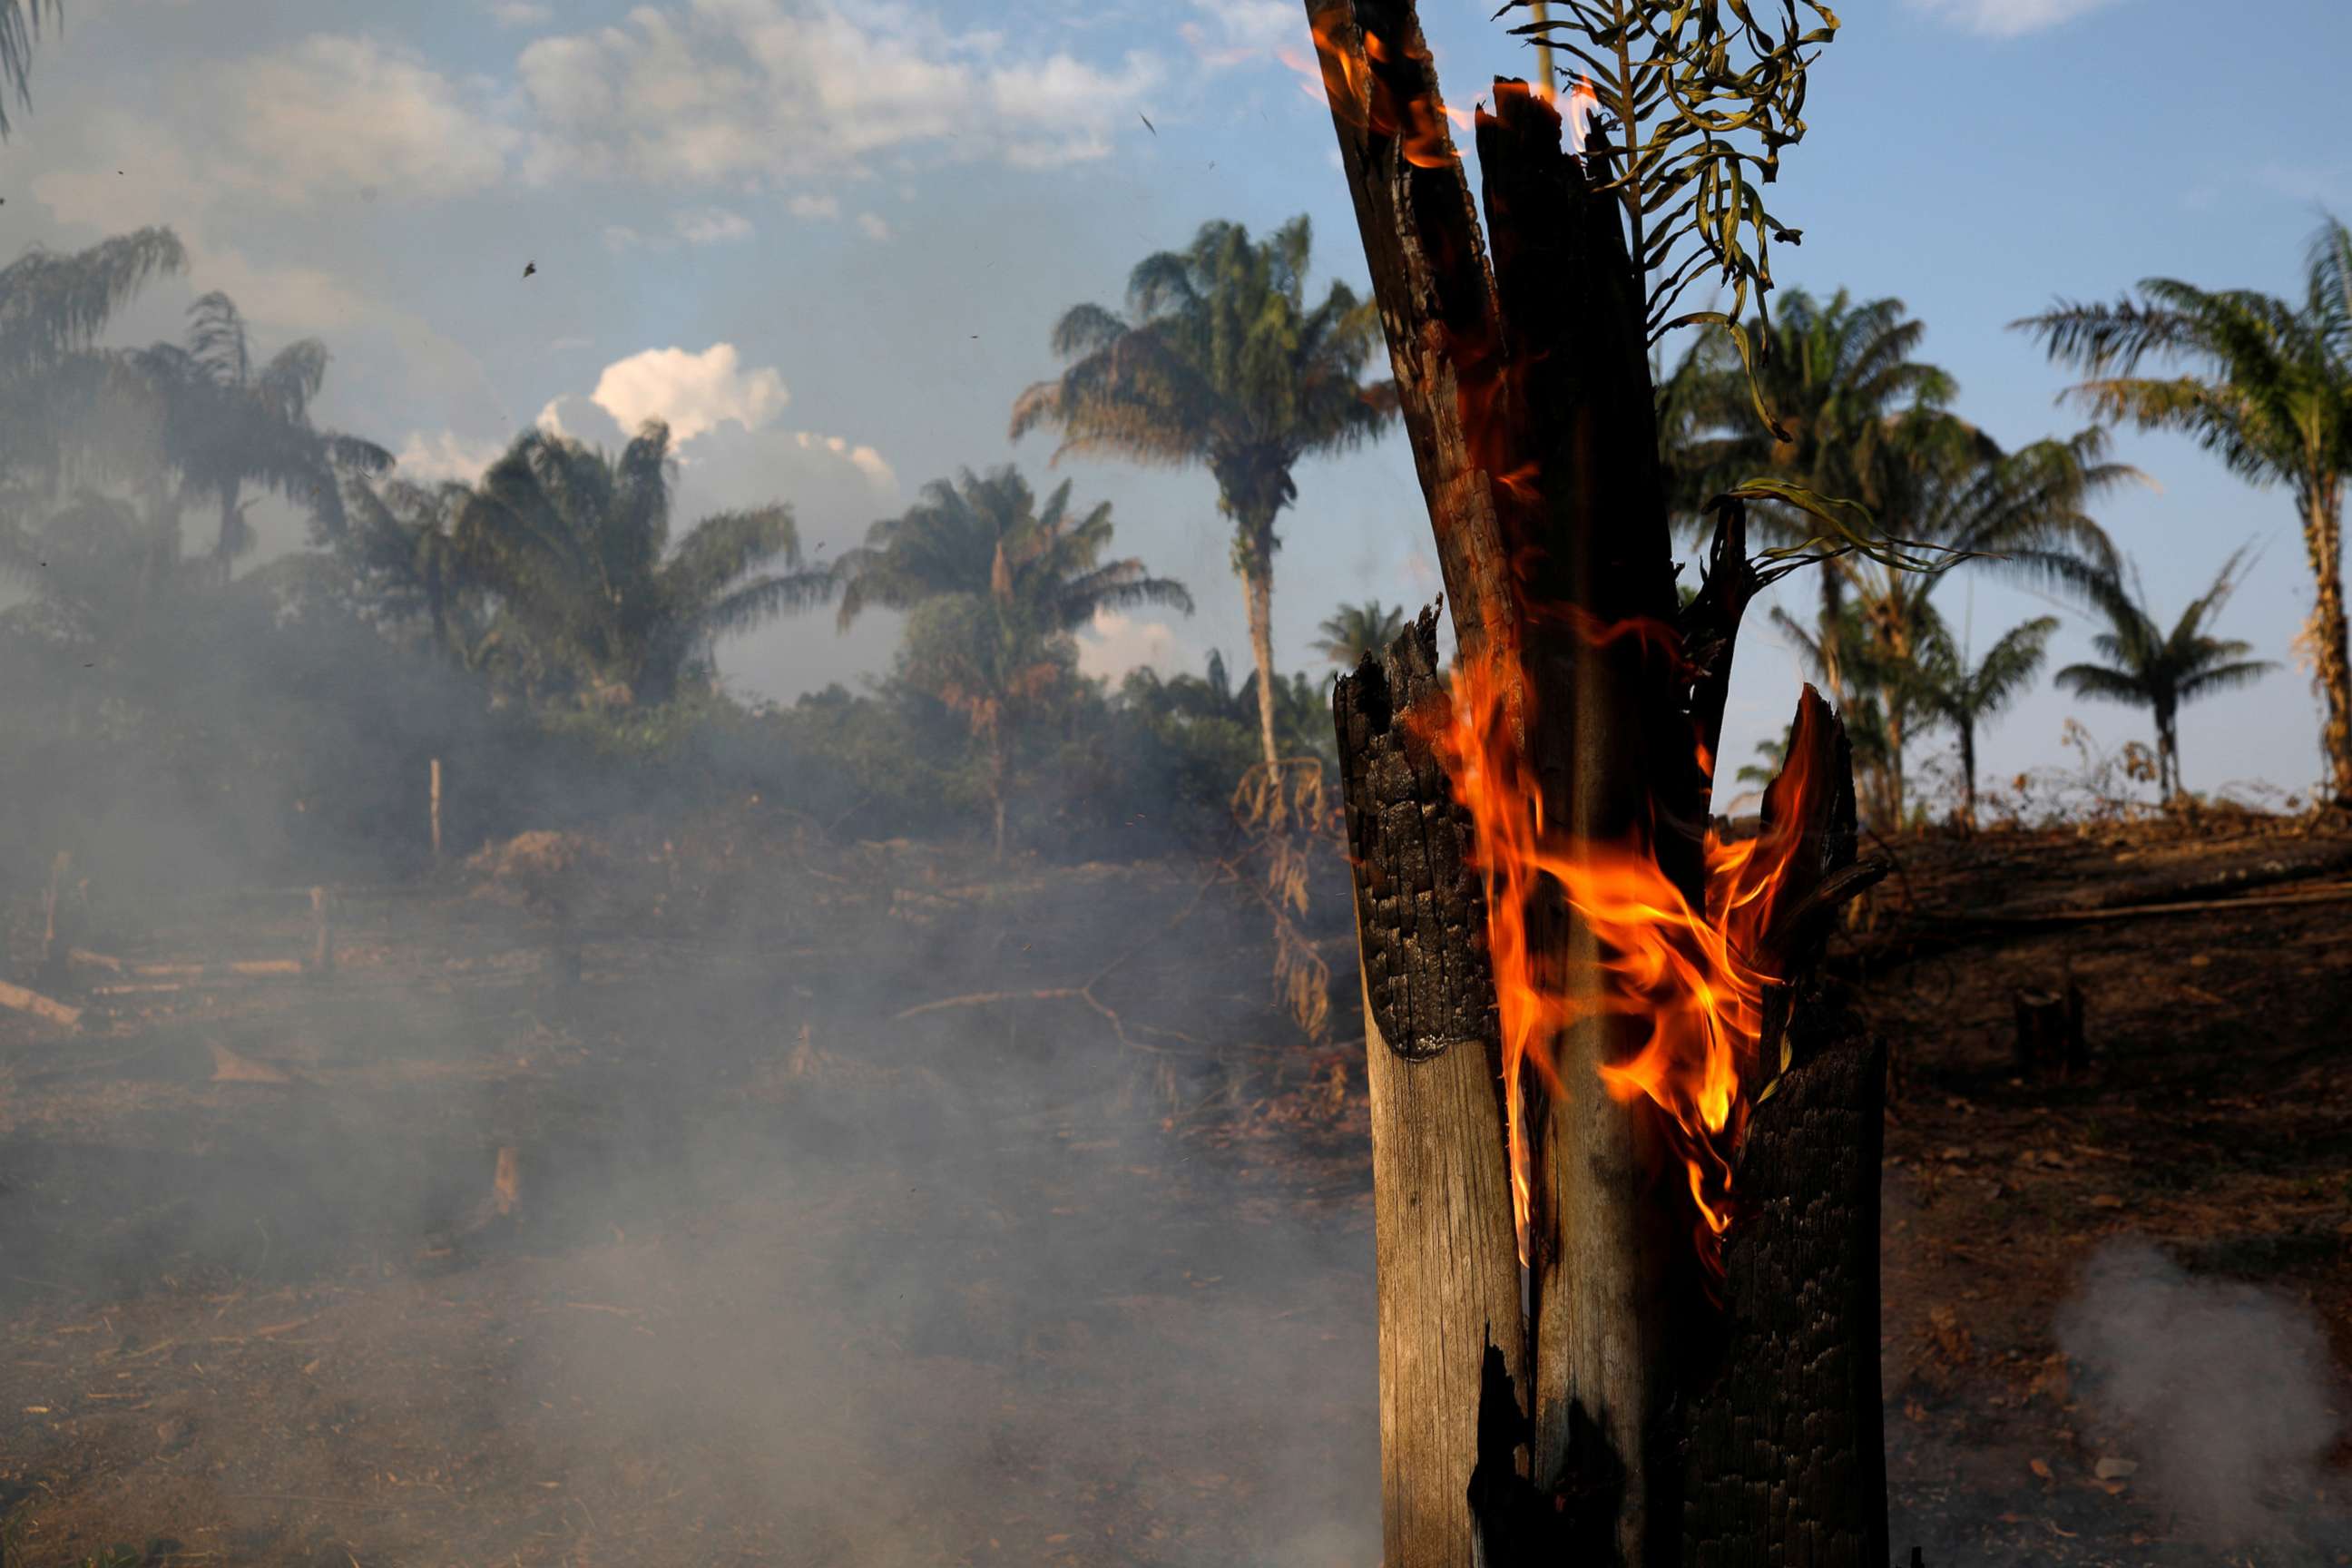 PHOTO: A tract of Amazon jungle is seen burning as it is being cleared by loggers and farmers in Iranduba, Amazonas state, Brazil August 20, 2019.